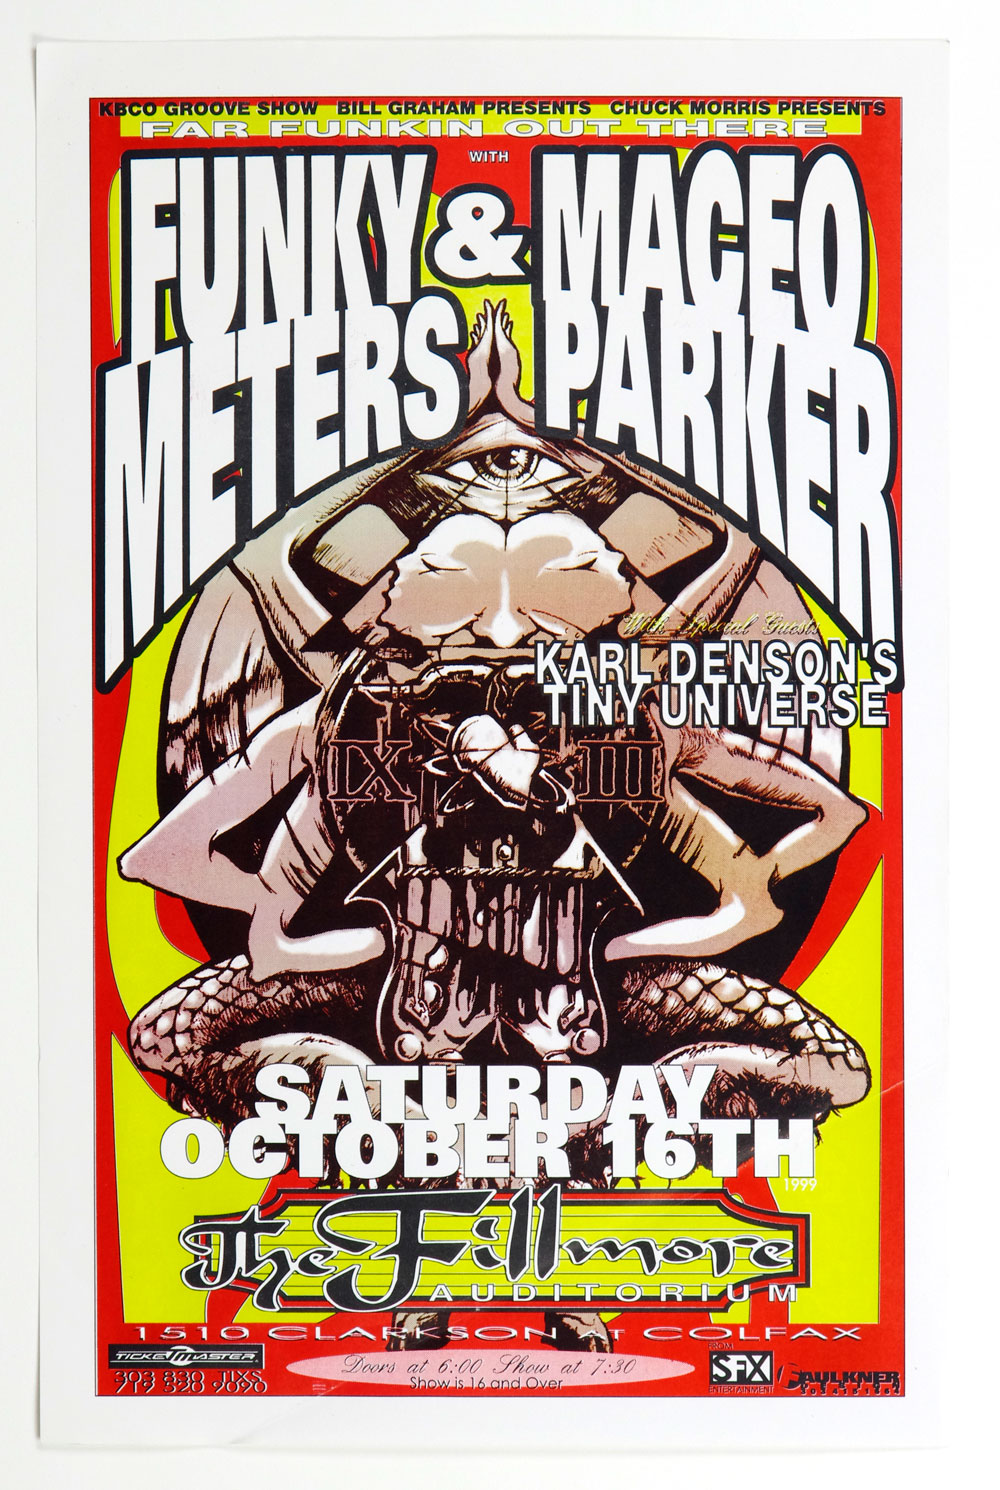 Funky Meters & Maceo Parker Poster 1999 Oct 16 The Fillmore Denver 